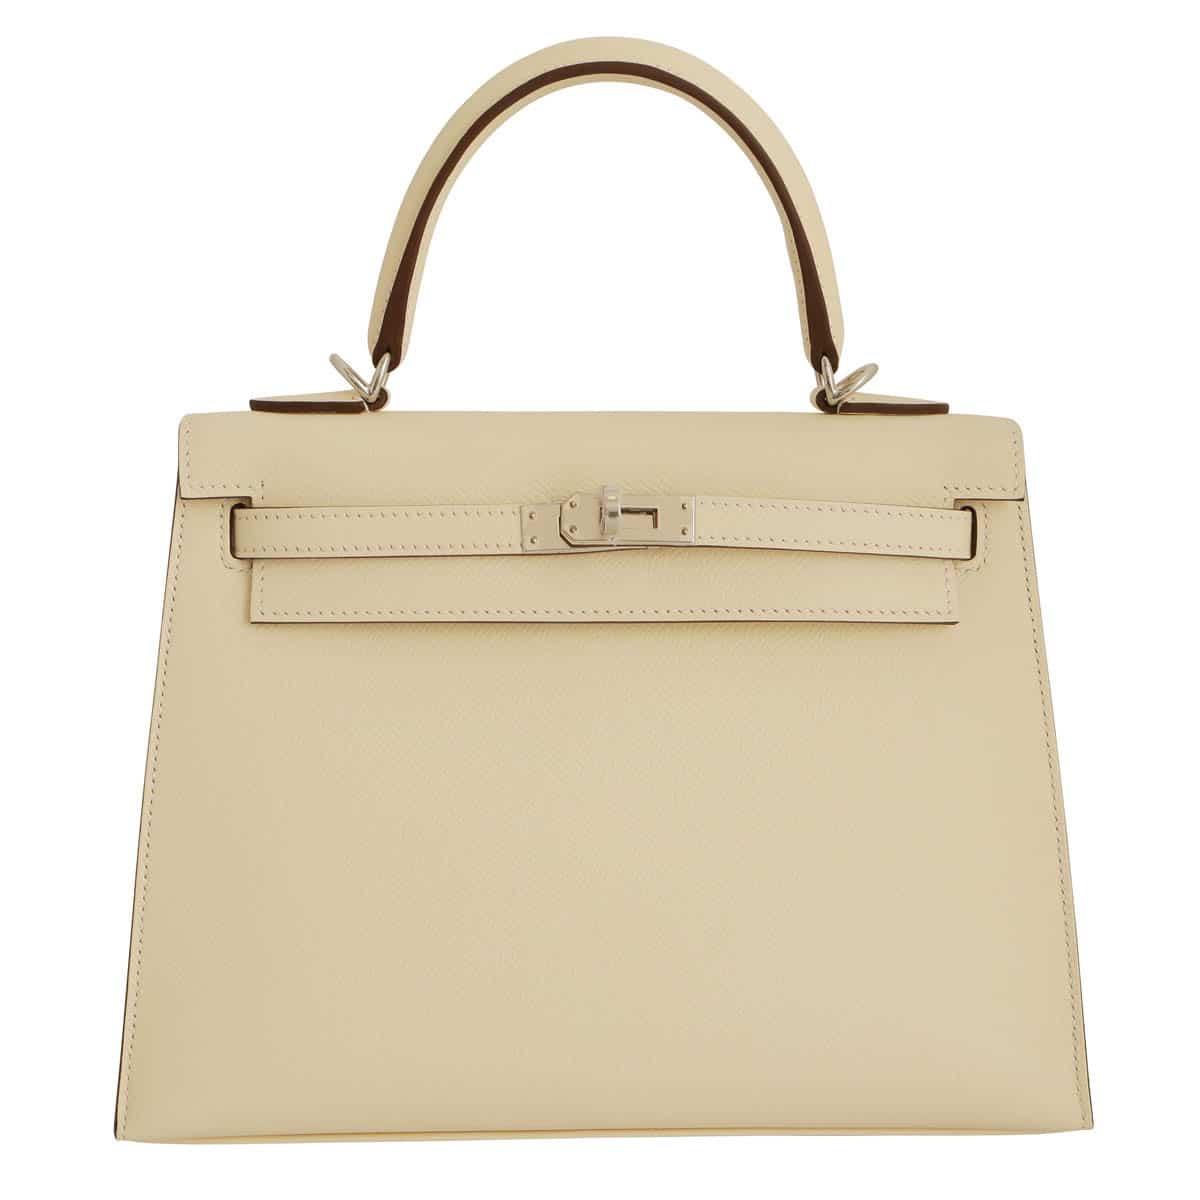 Hermes Kelly Tricolore bag 25 Sellier Nata/Chai/Gris meyer Epsom leather  Silver hardware